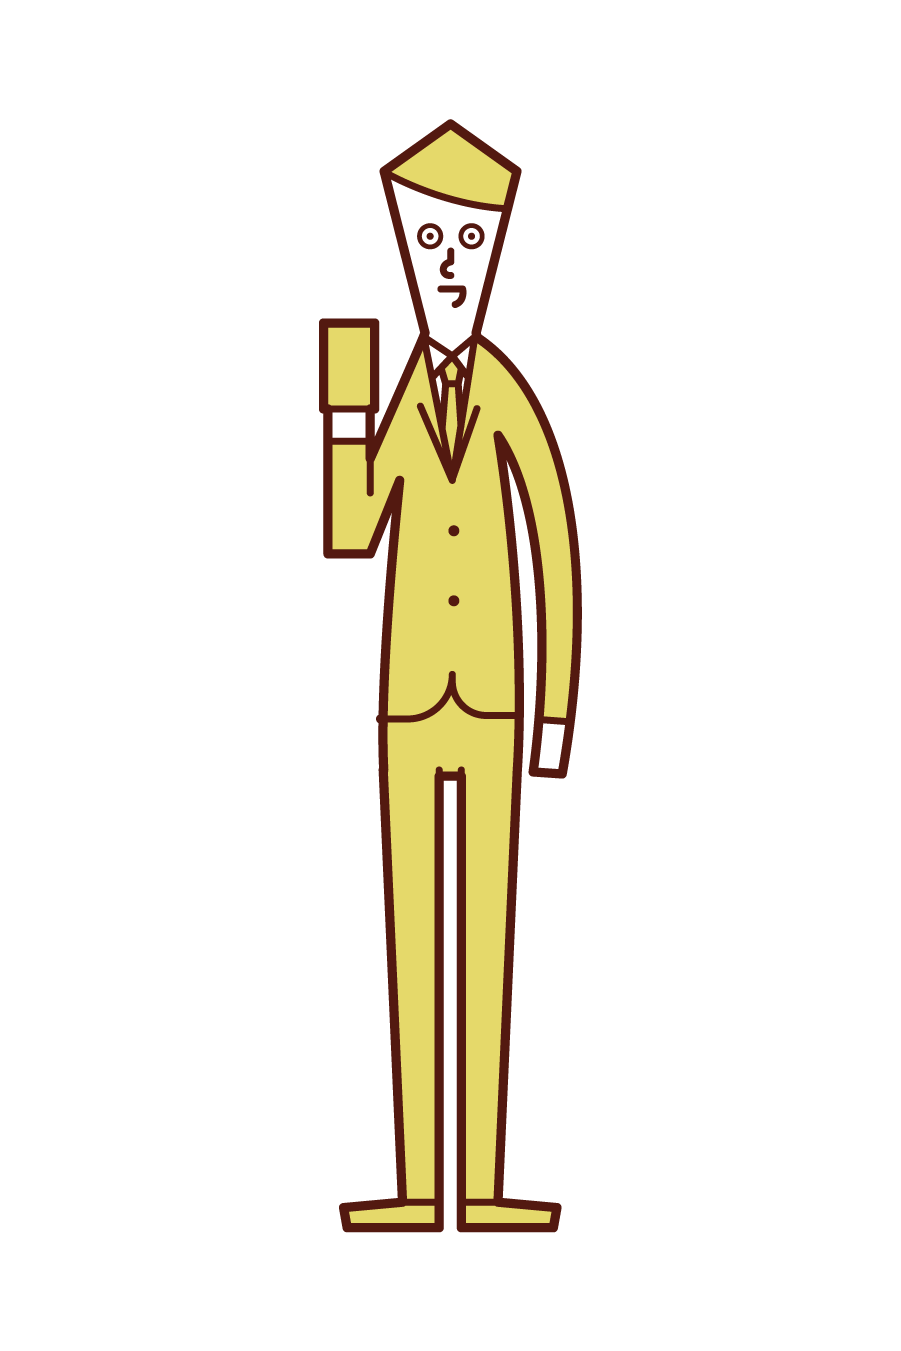 Illustration of a man with a smartphone or card